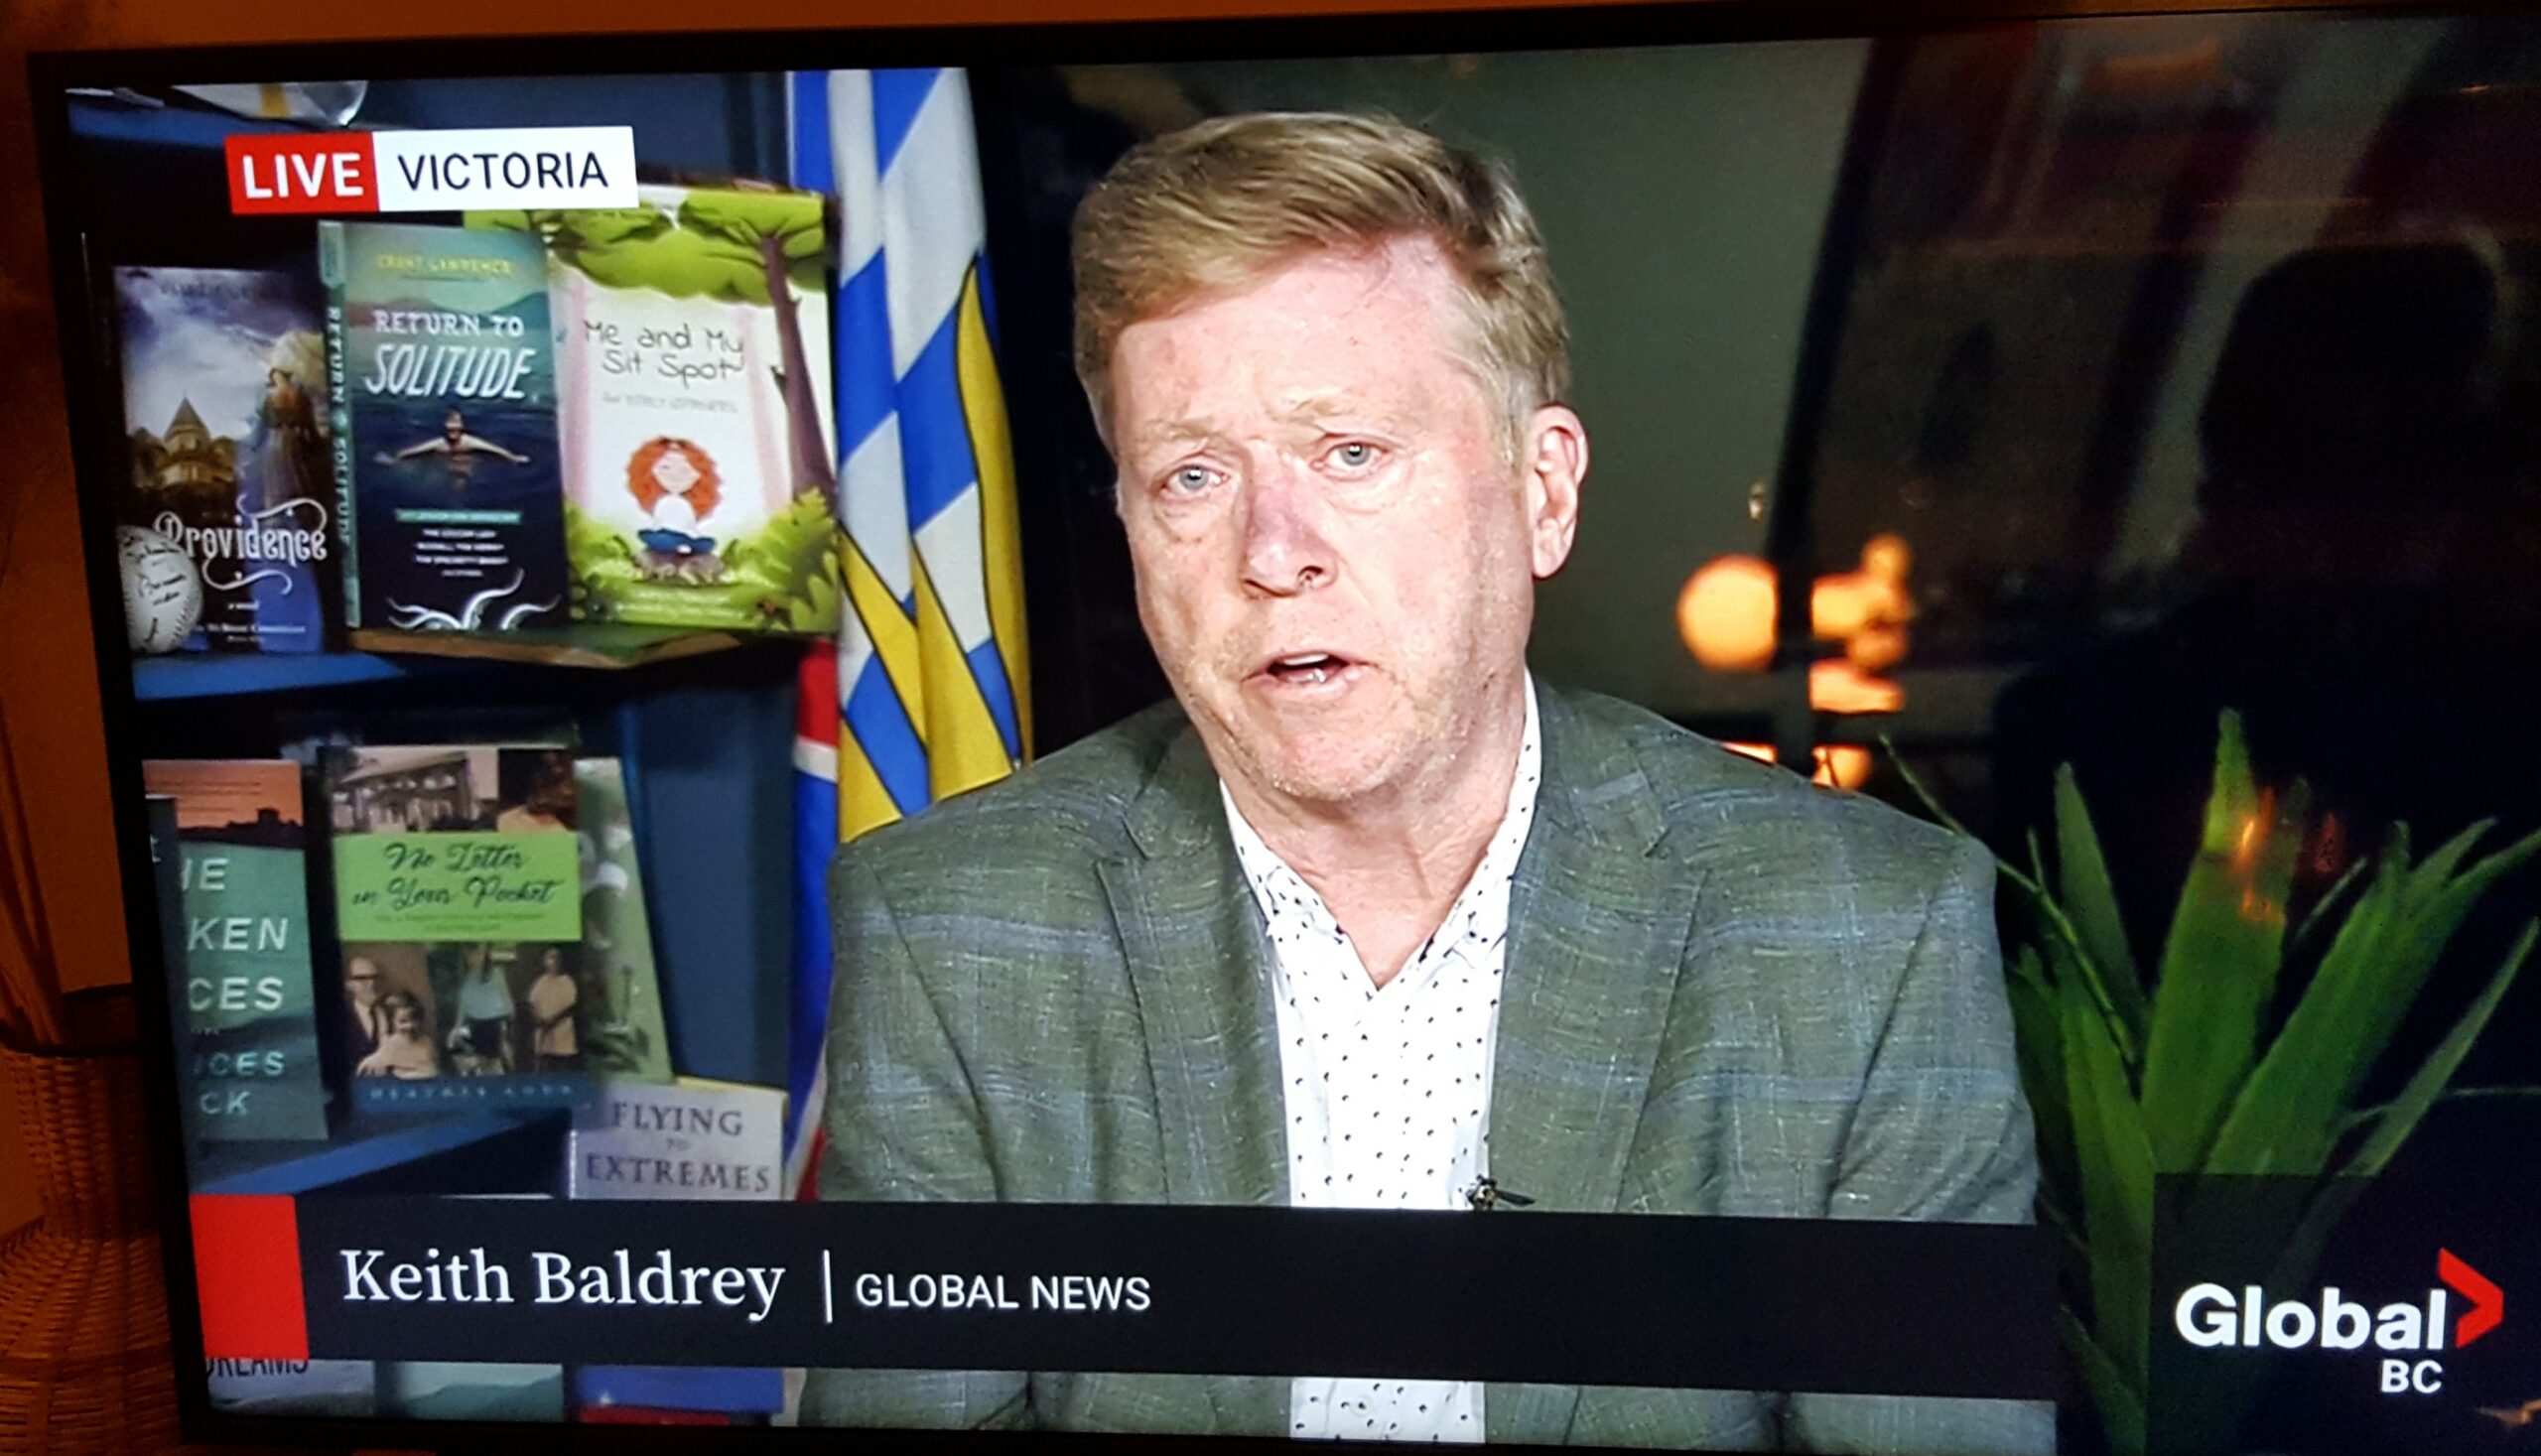 Global TV's Victoria correspondent Keith Baldrey, reporting live from Victoria, with bookshelves behind him that feature BC books, one of which is The Broken Places